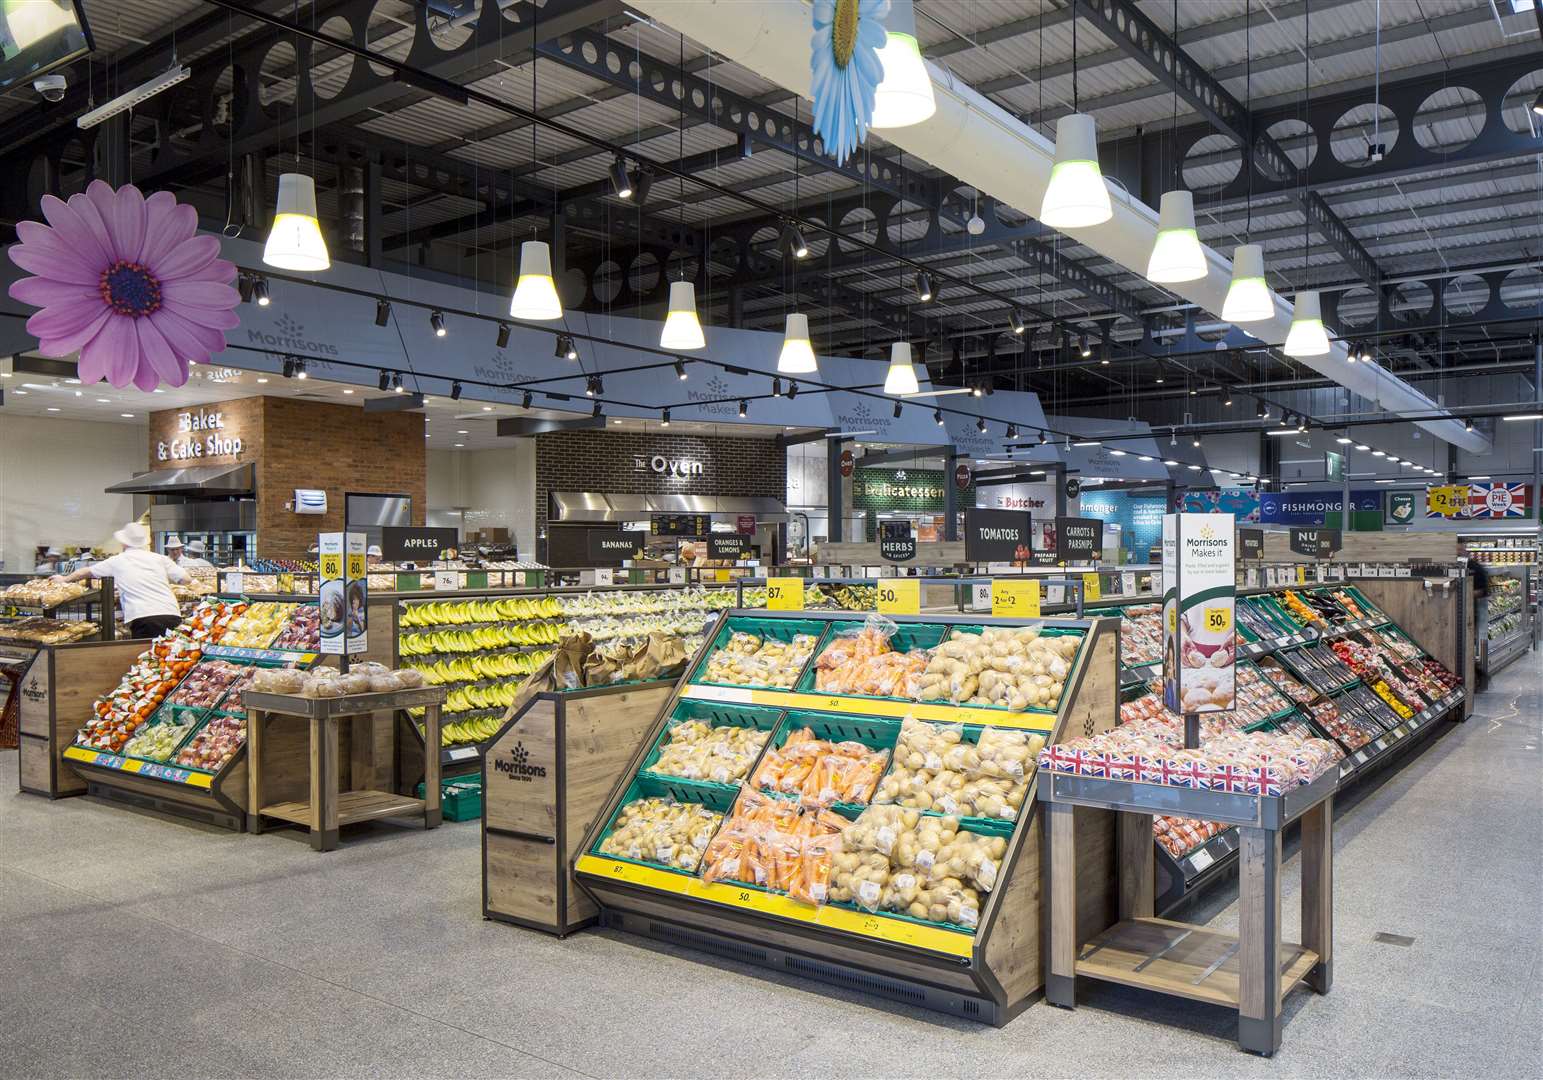 New photos show what the inside of Folkestone's new Morrisons could look like